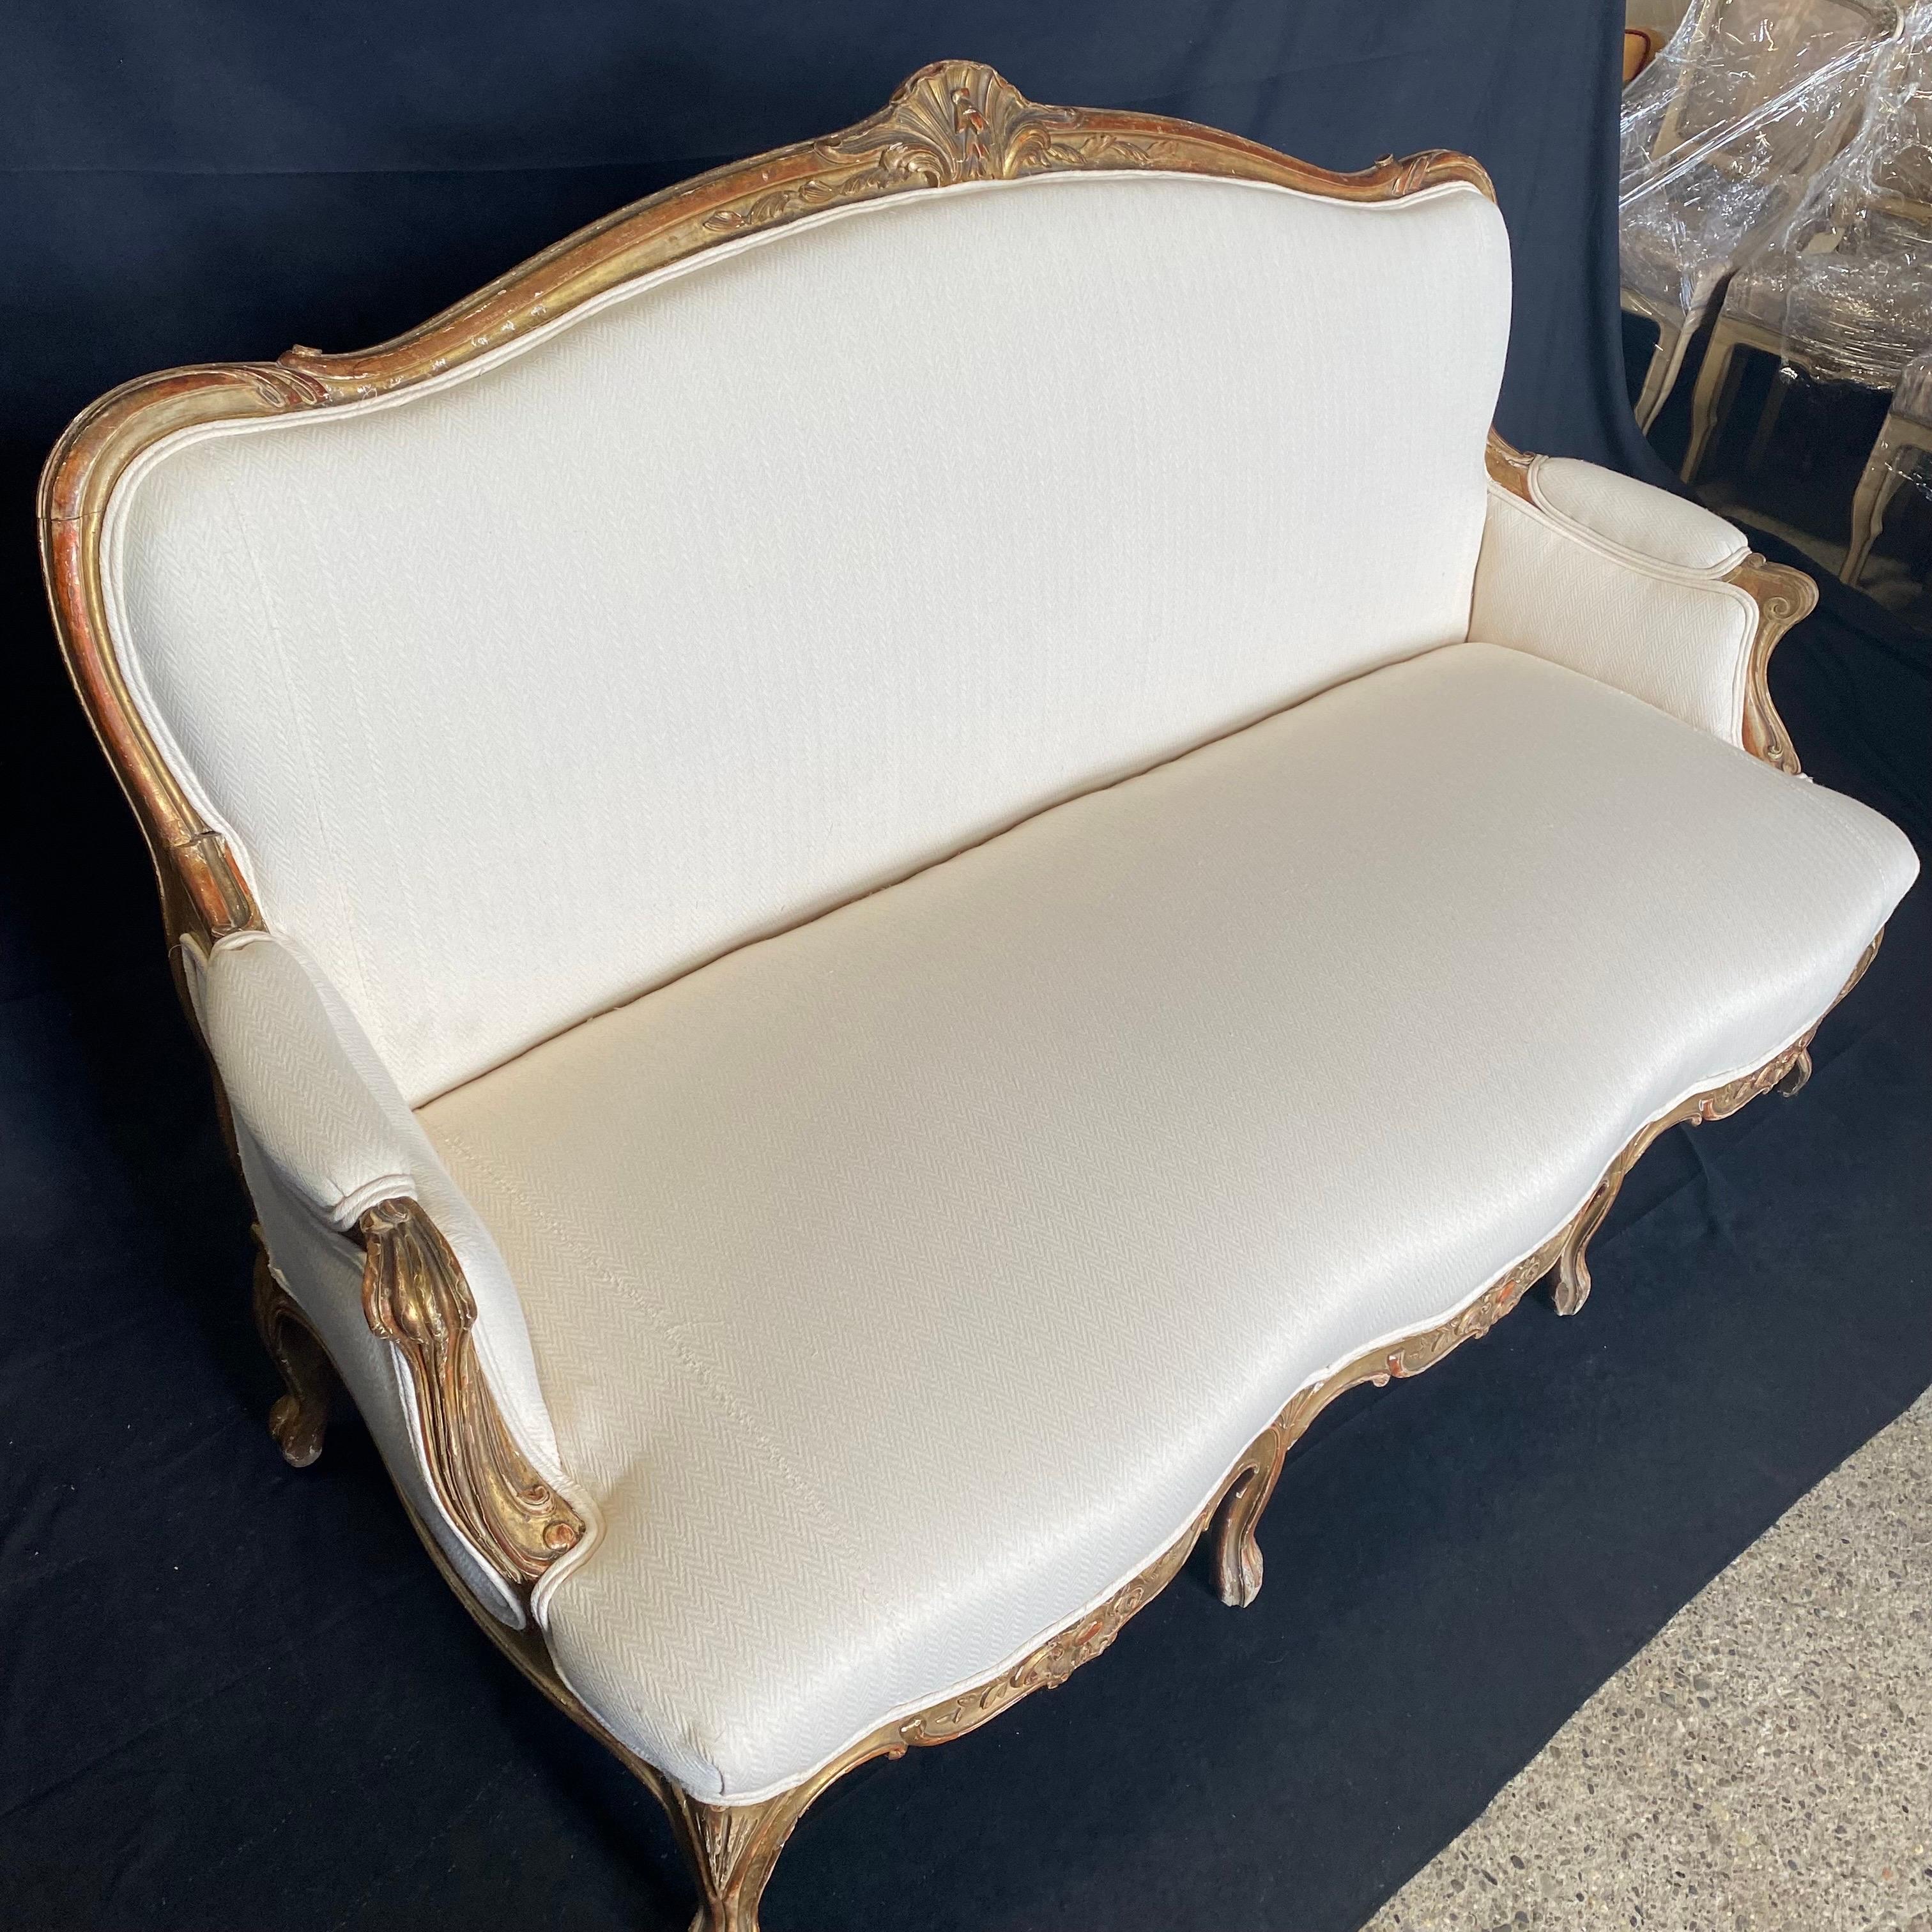 Superb Carved Gilded 19th Century Louis XV French Provencal Sofa For Sale 1